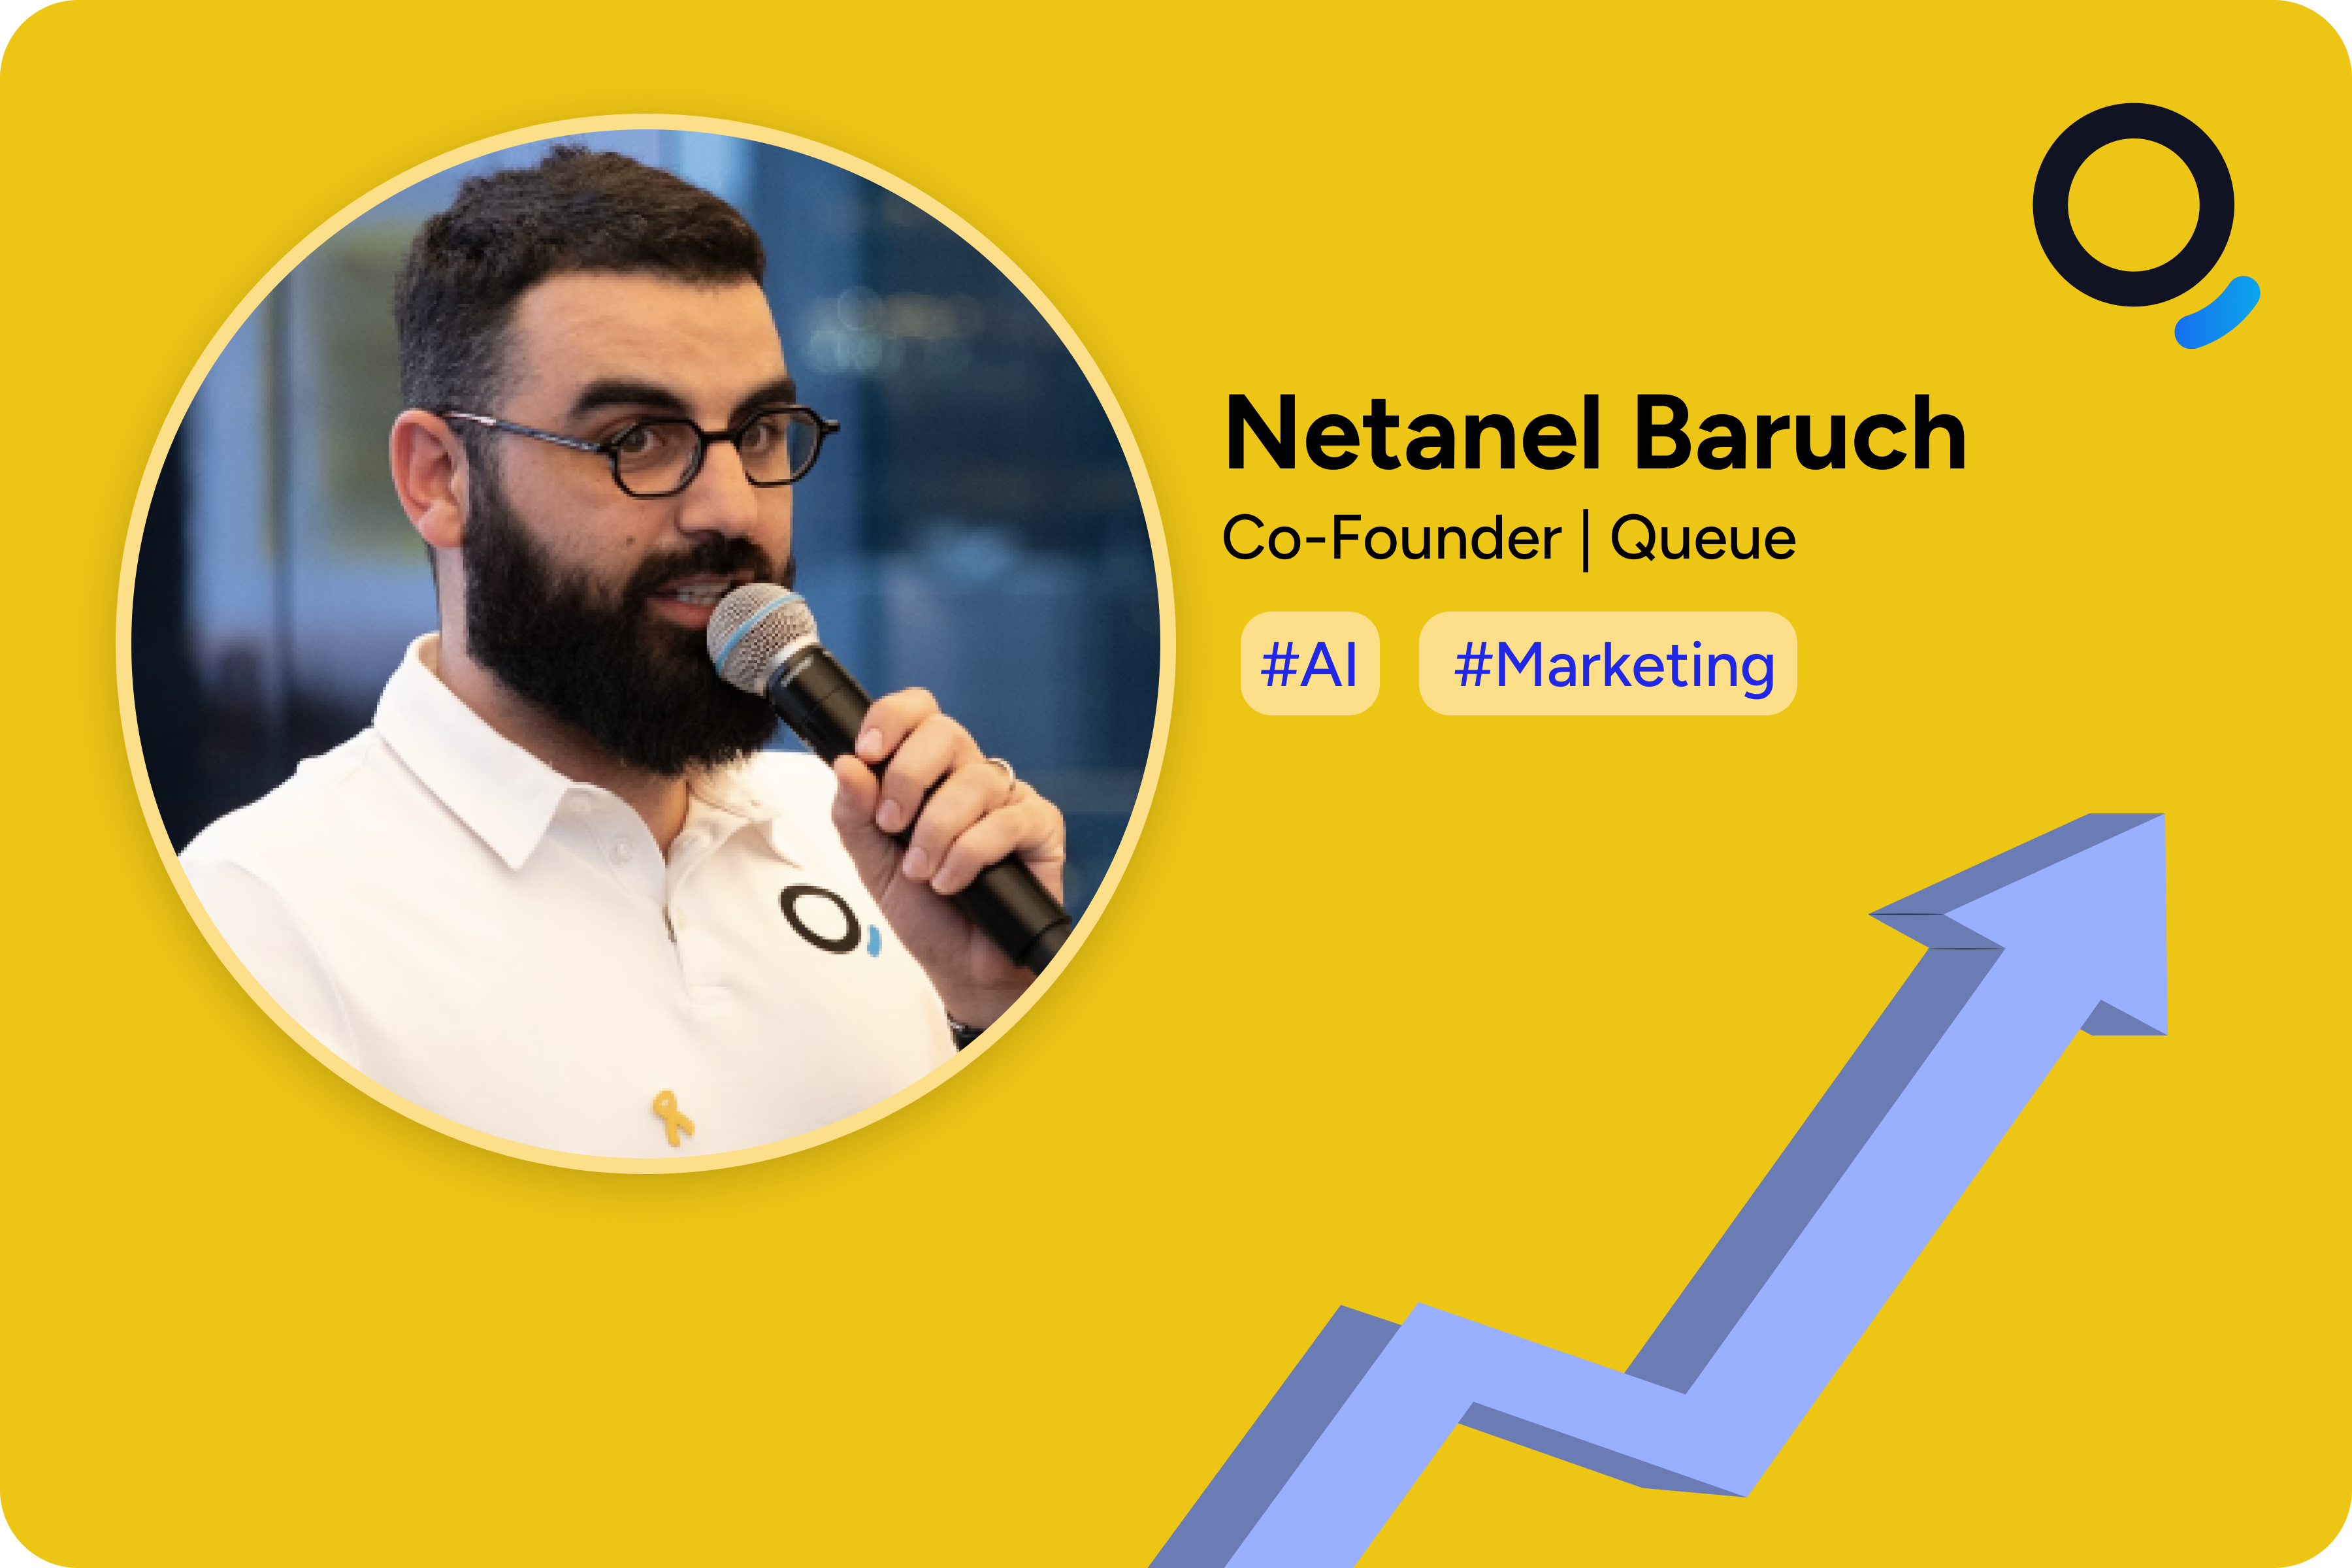 Netanel Baruch, Co-Founder of Queue, speaking into a microphone. Background includes Queue's branding with tags #AI and #Marketing.